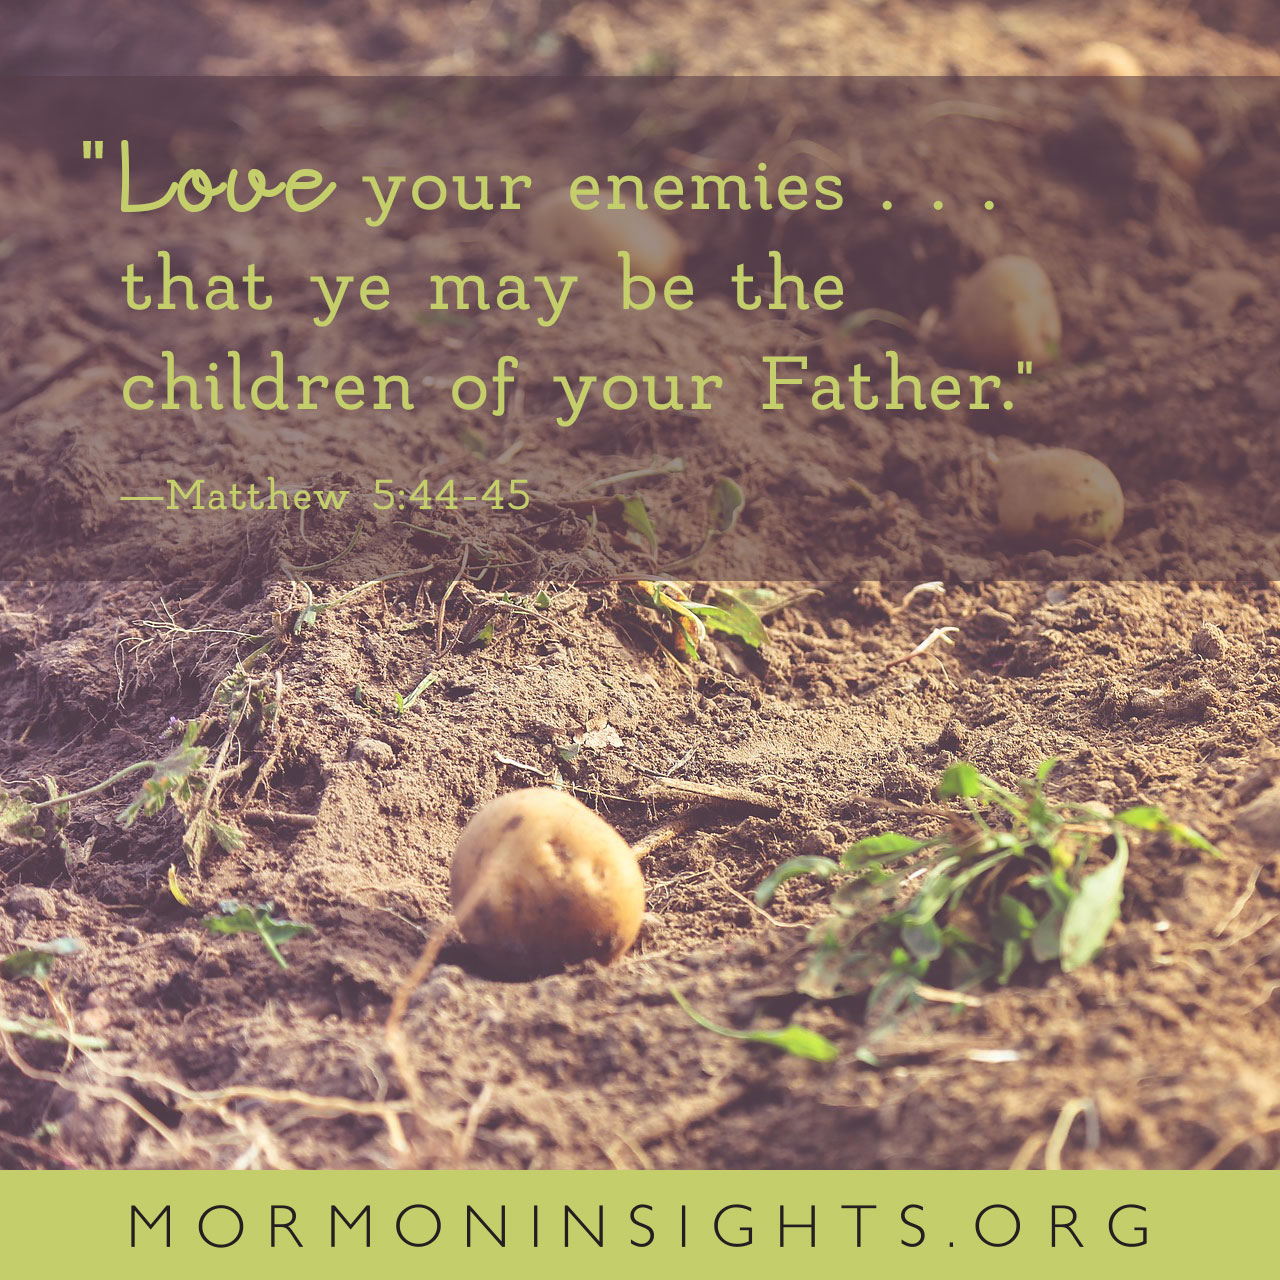 "Love your enemies . . . that ye may be the children of your Father." -Matthew 5:44-45. potatoes in a field